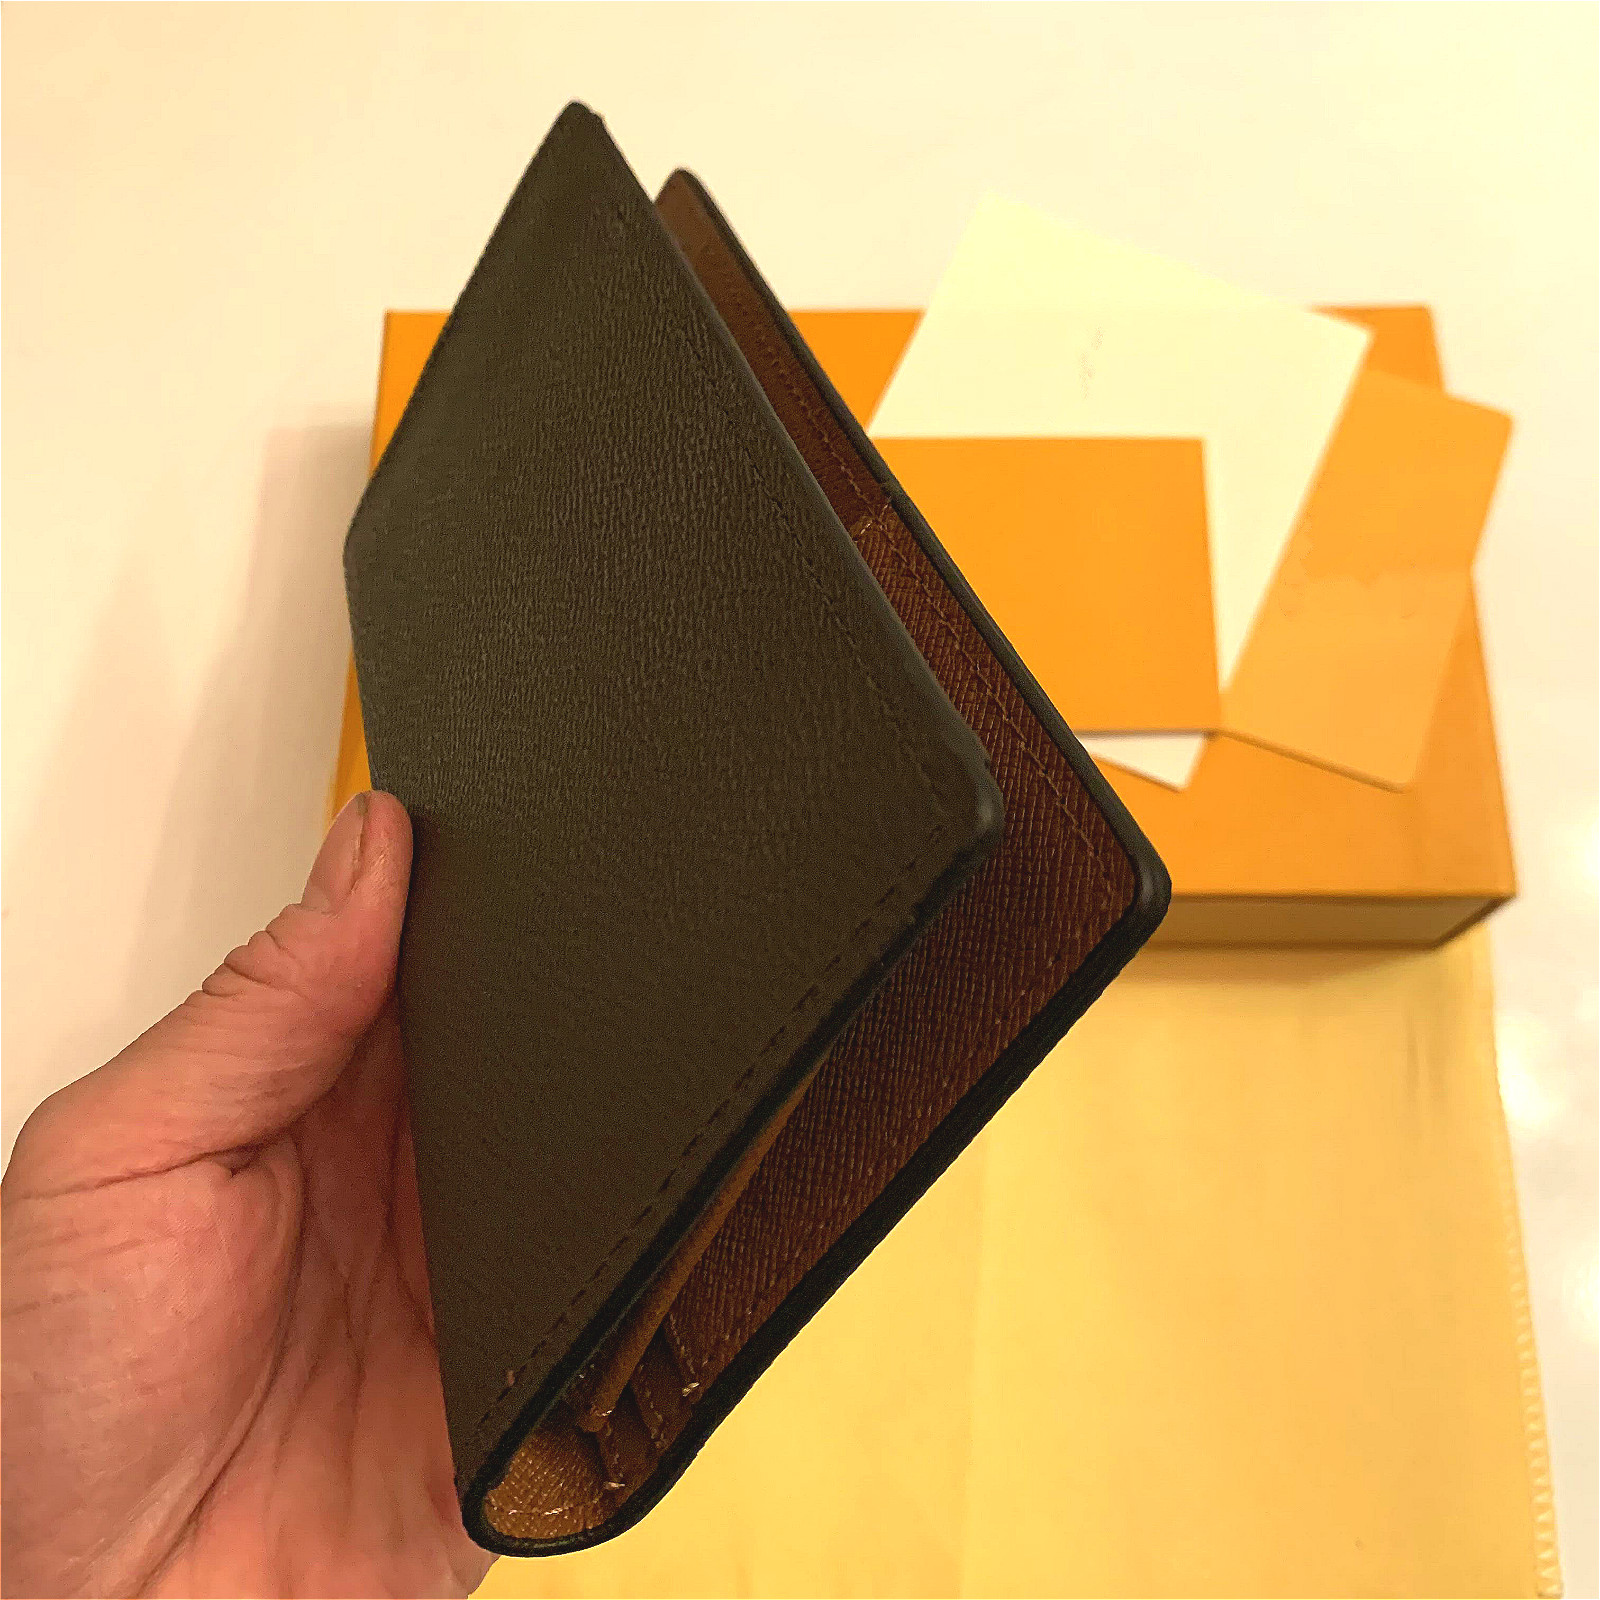 2022 BRAZZA WALLET Stylish Mens Jacket Long Wallet in Brown Waterproof Checkered Canvas for Holding Change Notes Credit Cards Good321f